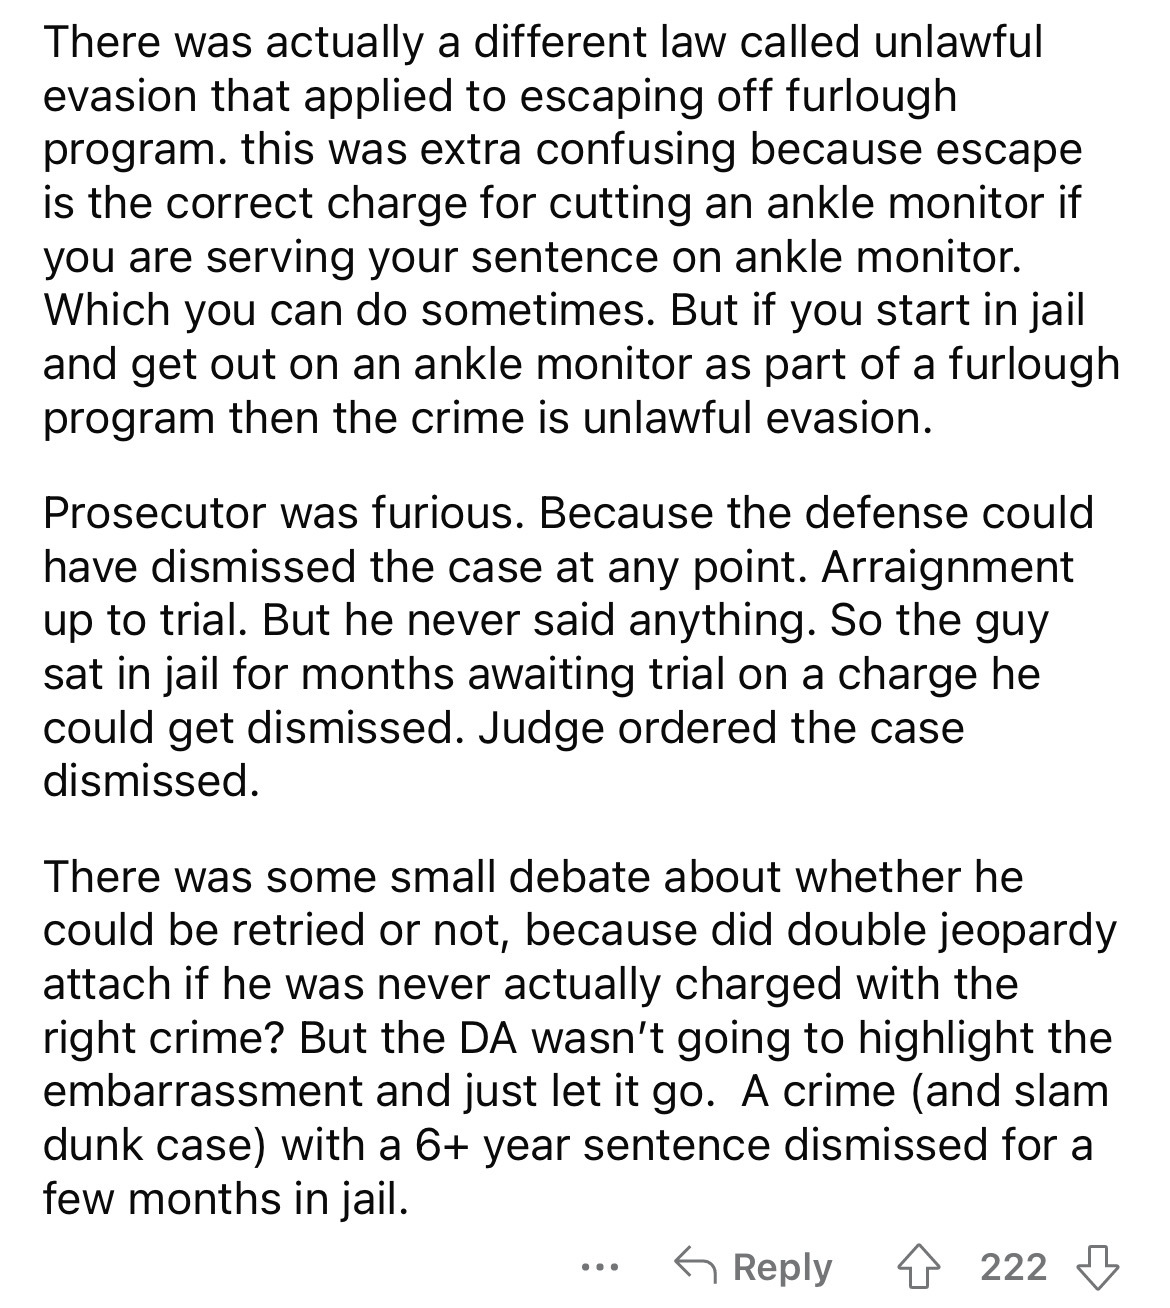 document - There was actually a different law called unlawful evasion that applied to escaping off furlough program. this was extra confusing because escape is the correct charge for cutting an ankle monitor if you are serving your sentence on ankle monit